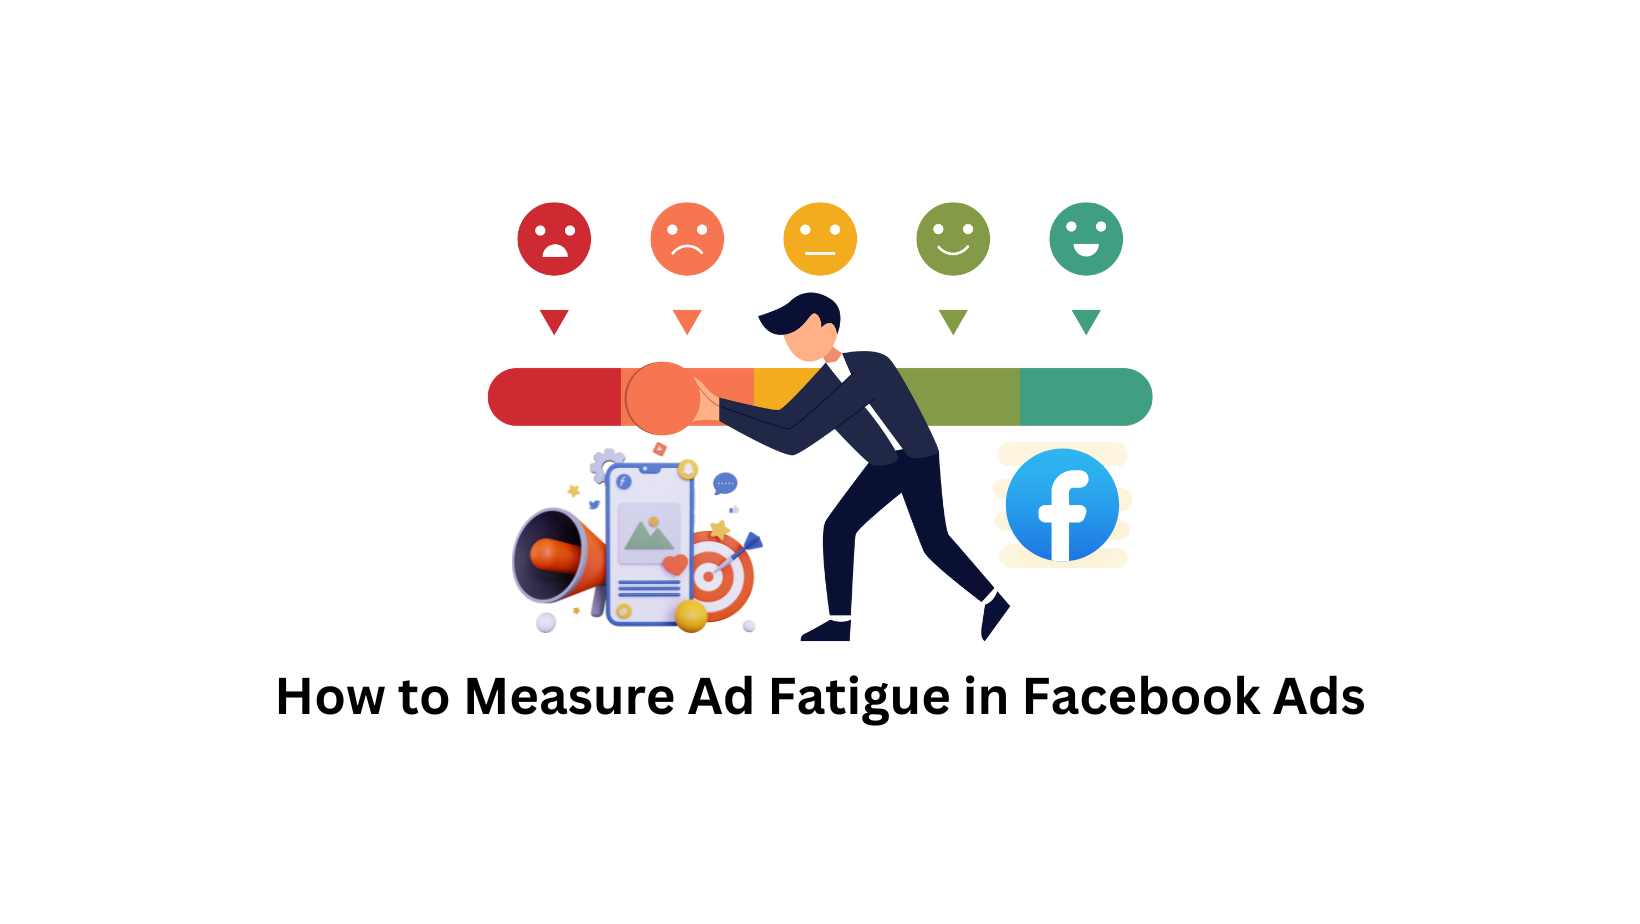 How to Measure Ad Fatigue in Facebook Ads